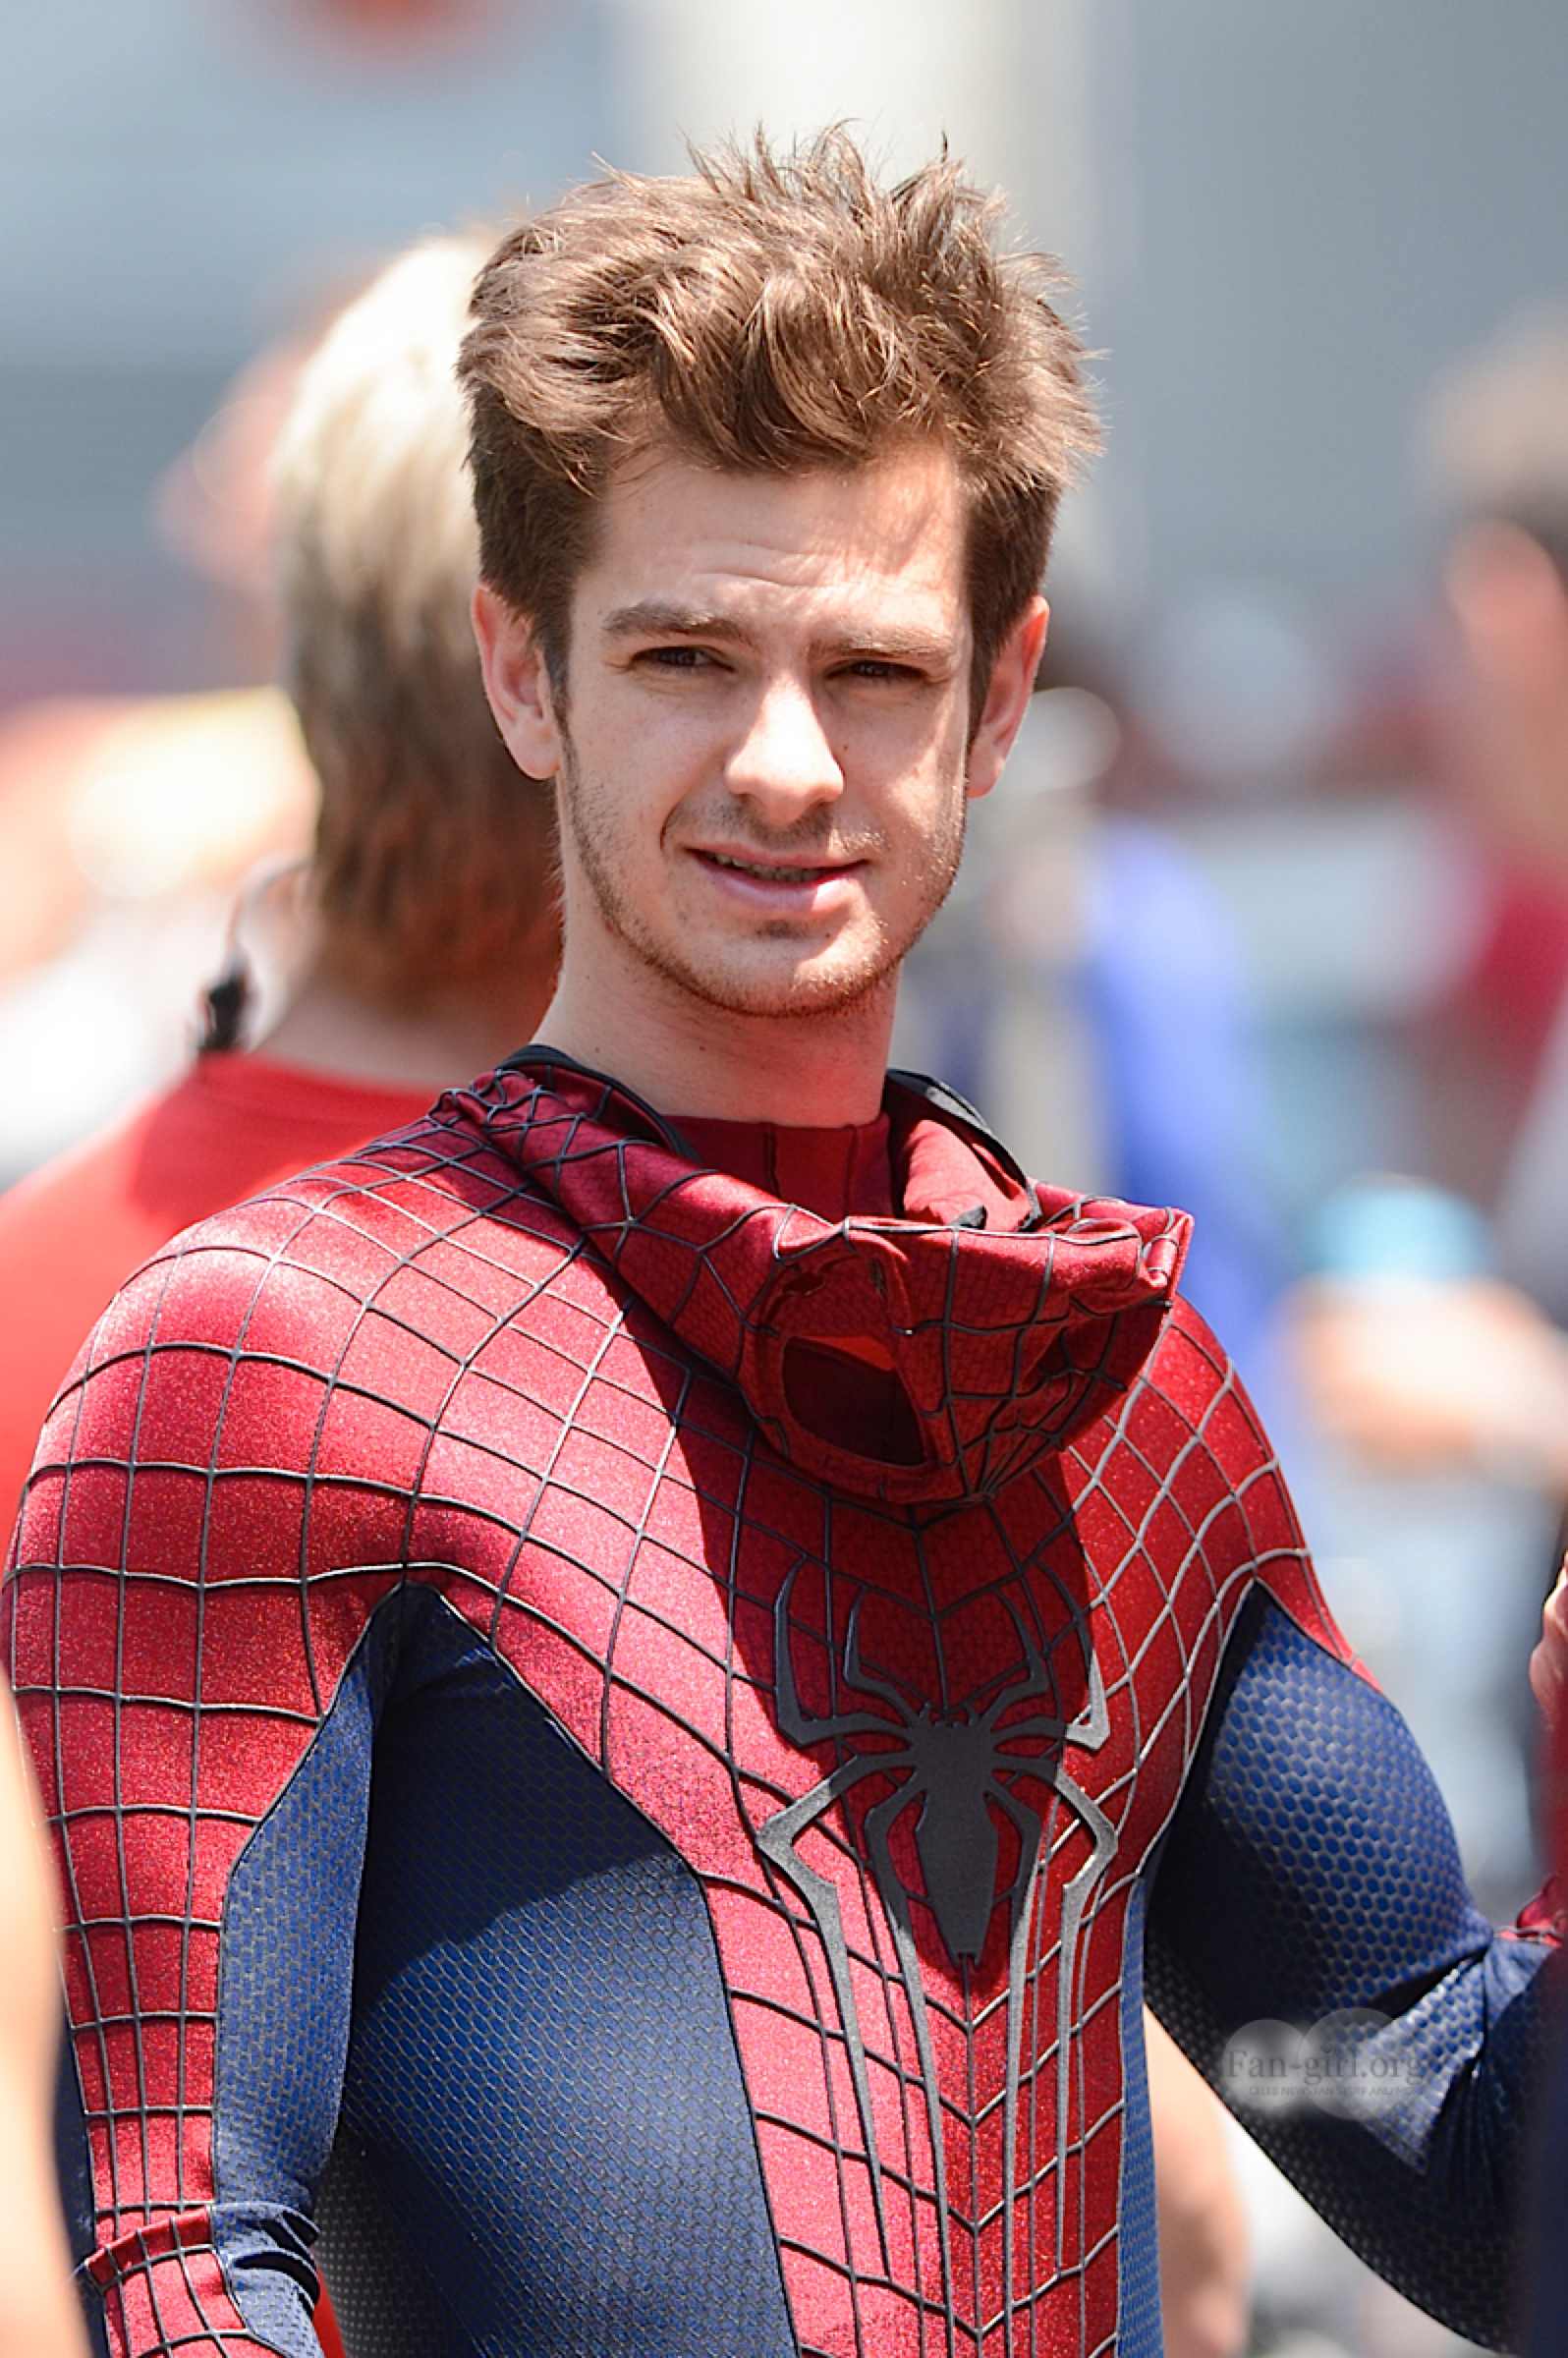 Andrew Garfield is seen on the set of 'The Amazing Spider-Man 2' in New York City. - Andrew Garfield